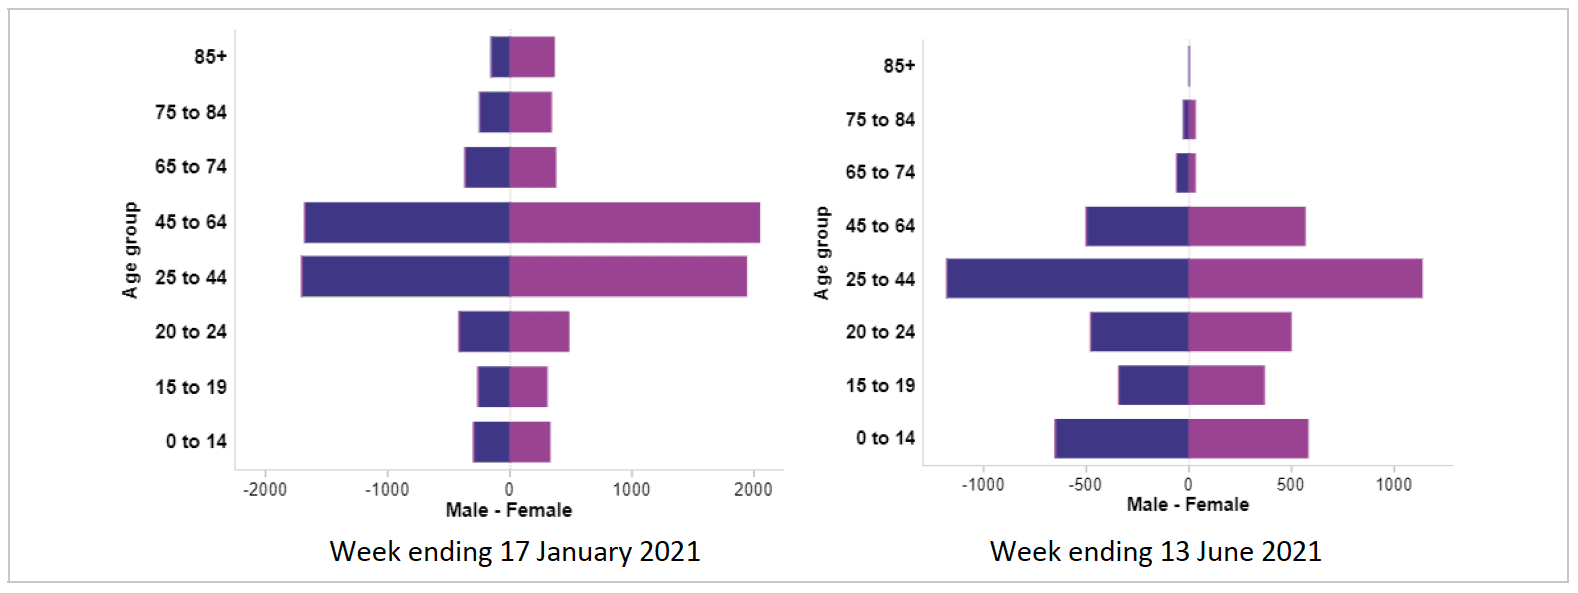 These two back-to-back bar graphs show the number of COVID cases in eight different age groups, among males and females. The left hand graph shows this for the week ending 17th January 2021, and the right hand graph shows this for the week ending 13th June 2021. The number of COVID cases is fairly similar for males and females of each age group at both points in time, and much smaller for all age groups in June than it was in January. However in June a smaller proportion of COVID cases are in age groups over 45, and a larger proportion of cases is among those aged under 25, compared to January.